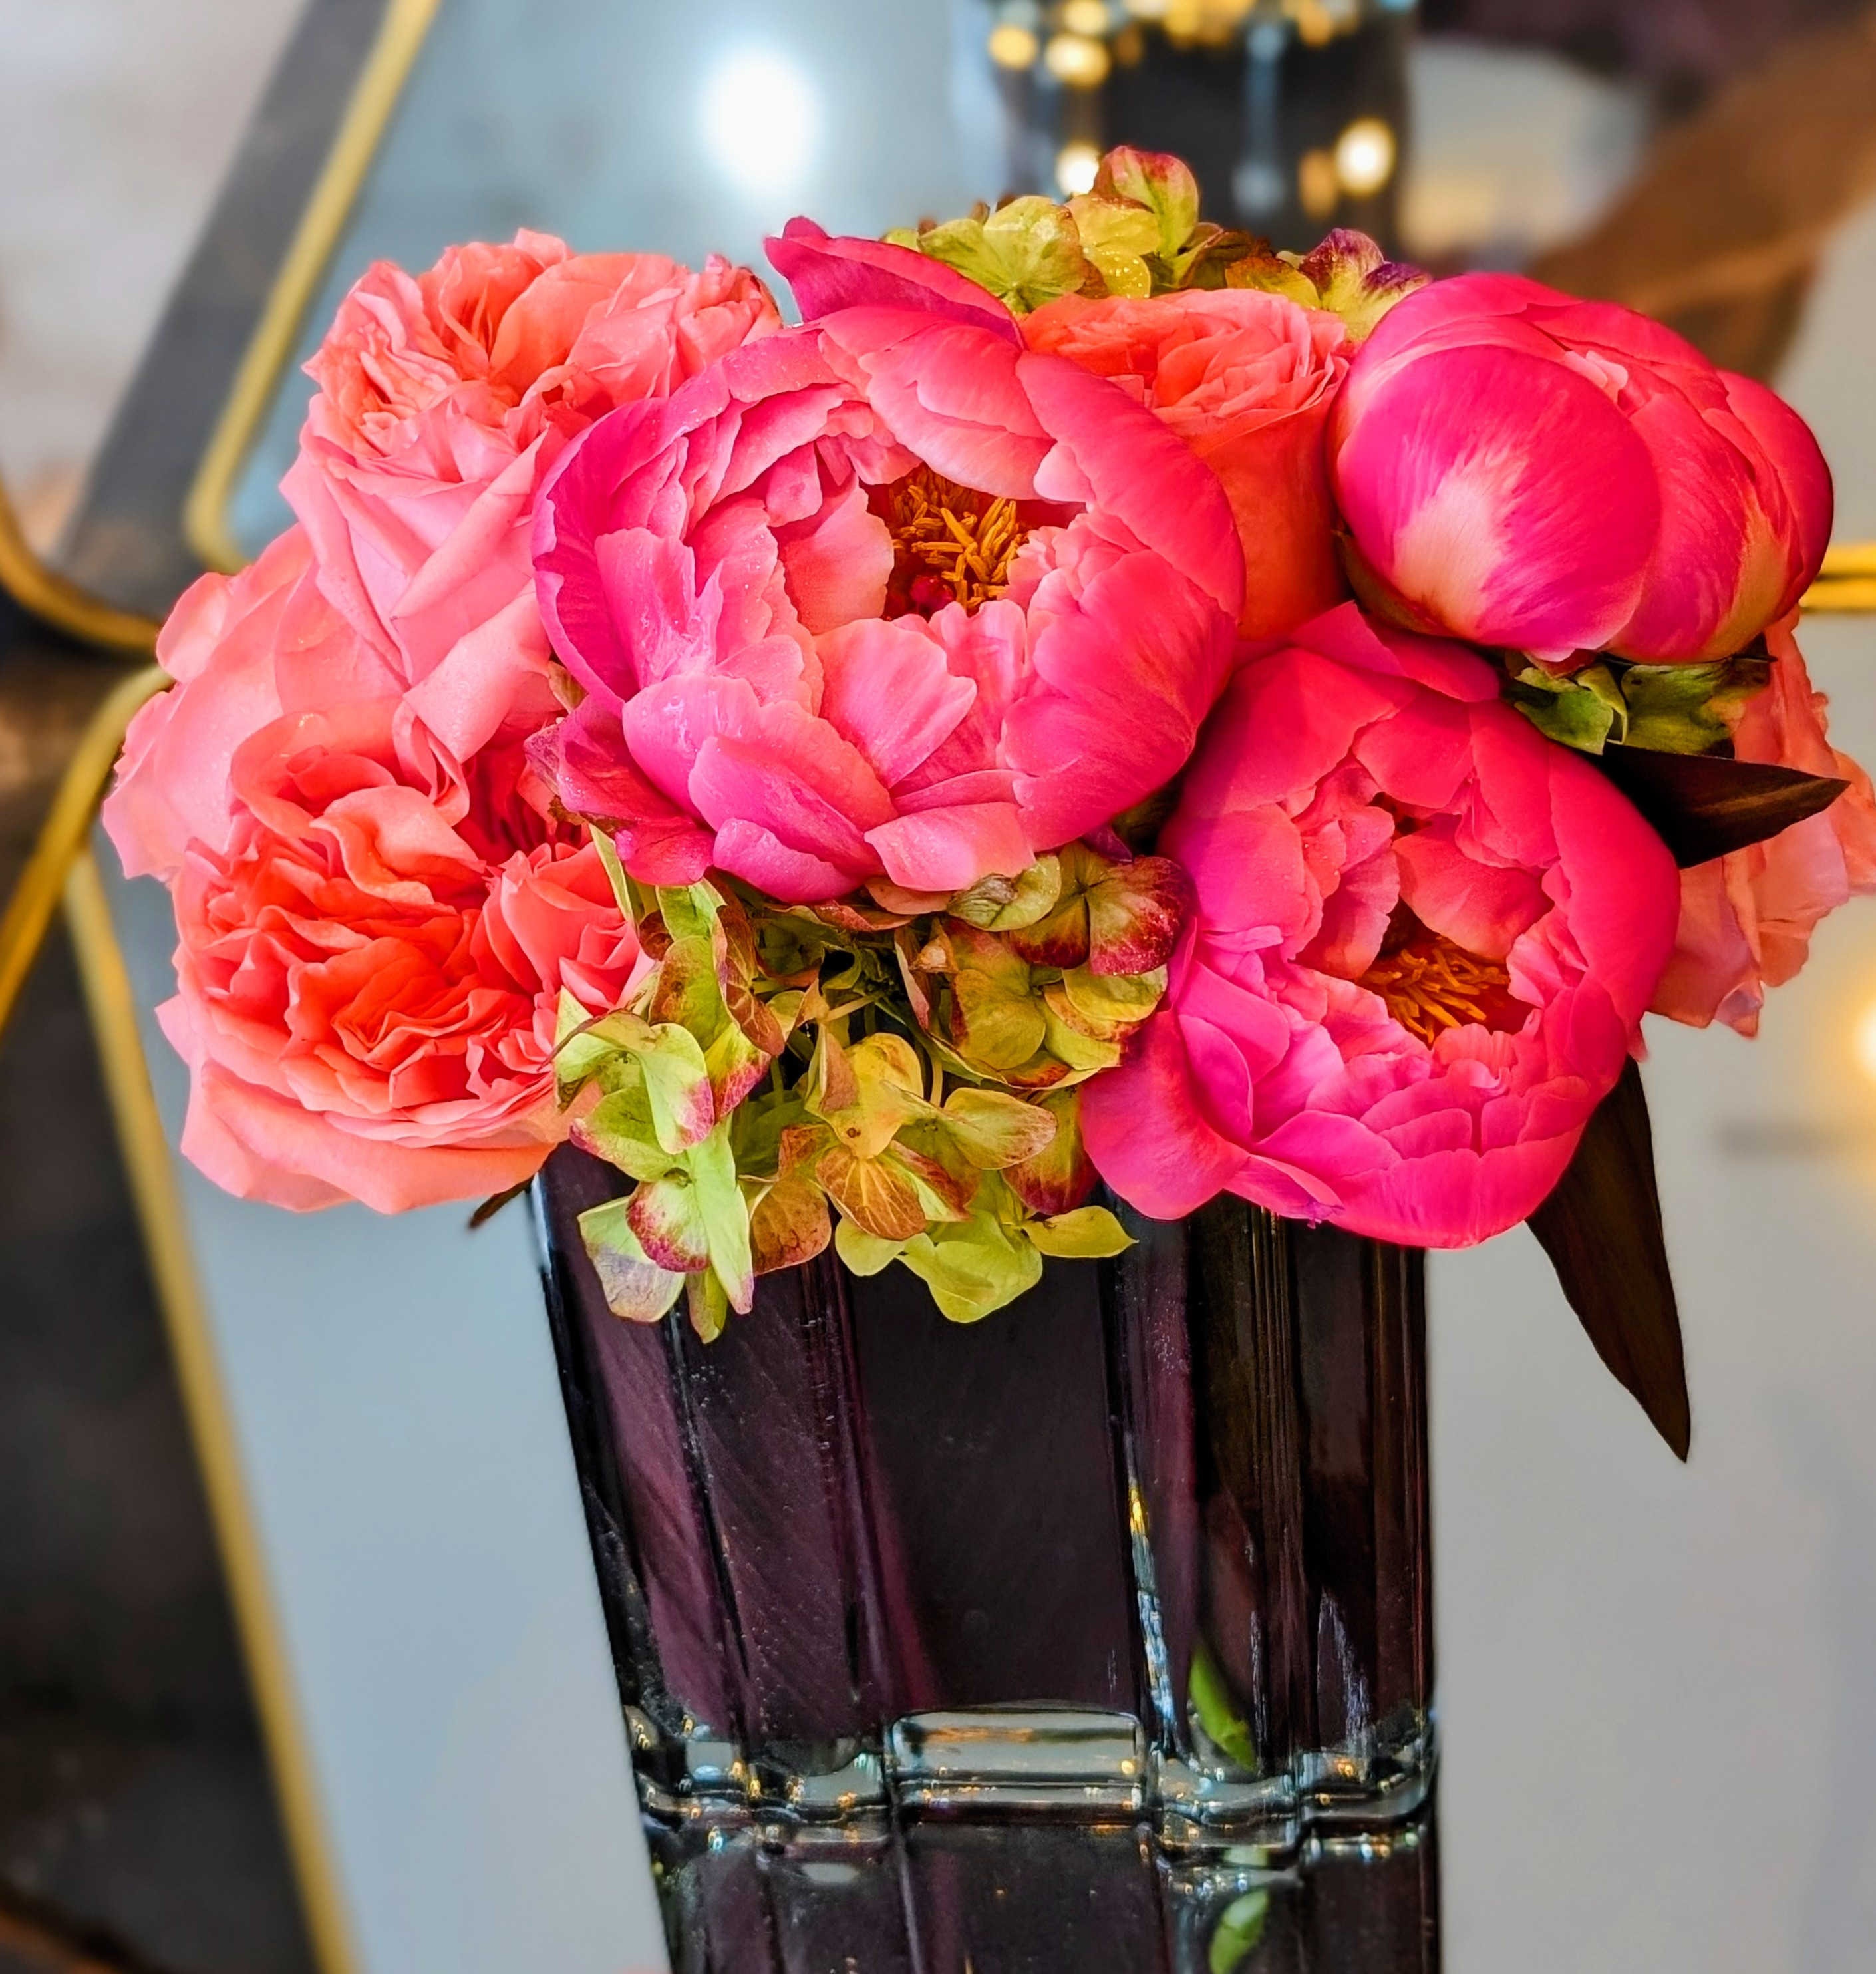 Coral Charm Peonies - Petit vase features amazing and very out of season peonies. Every ladys favorite!